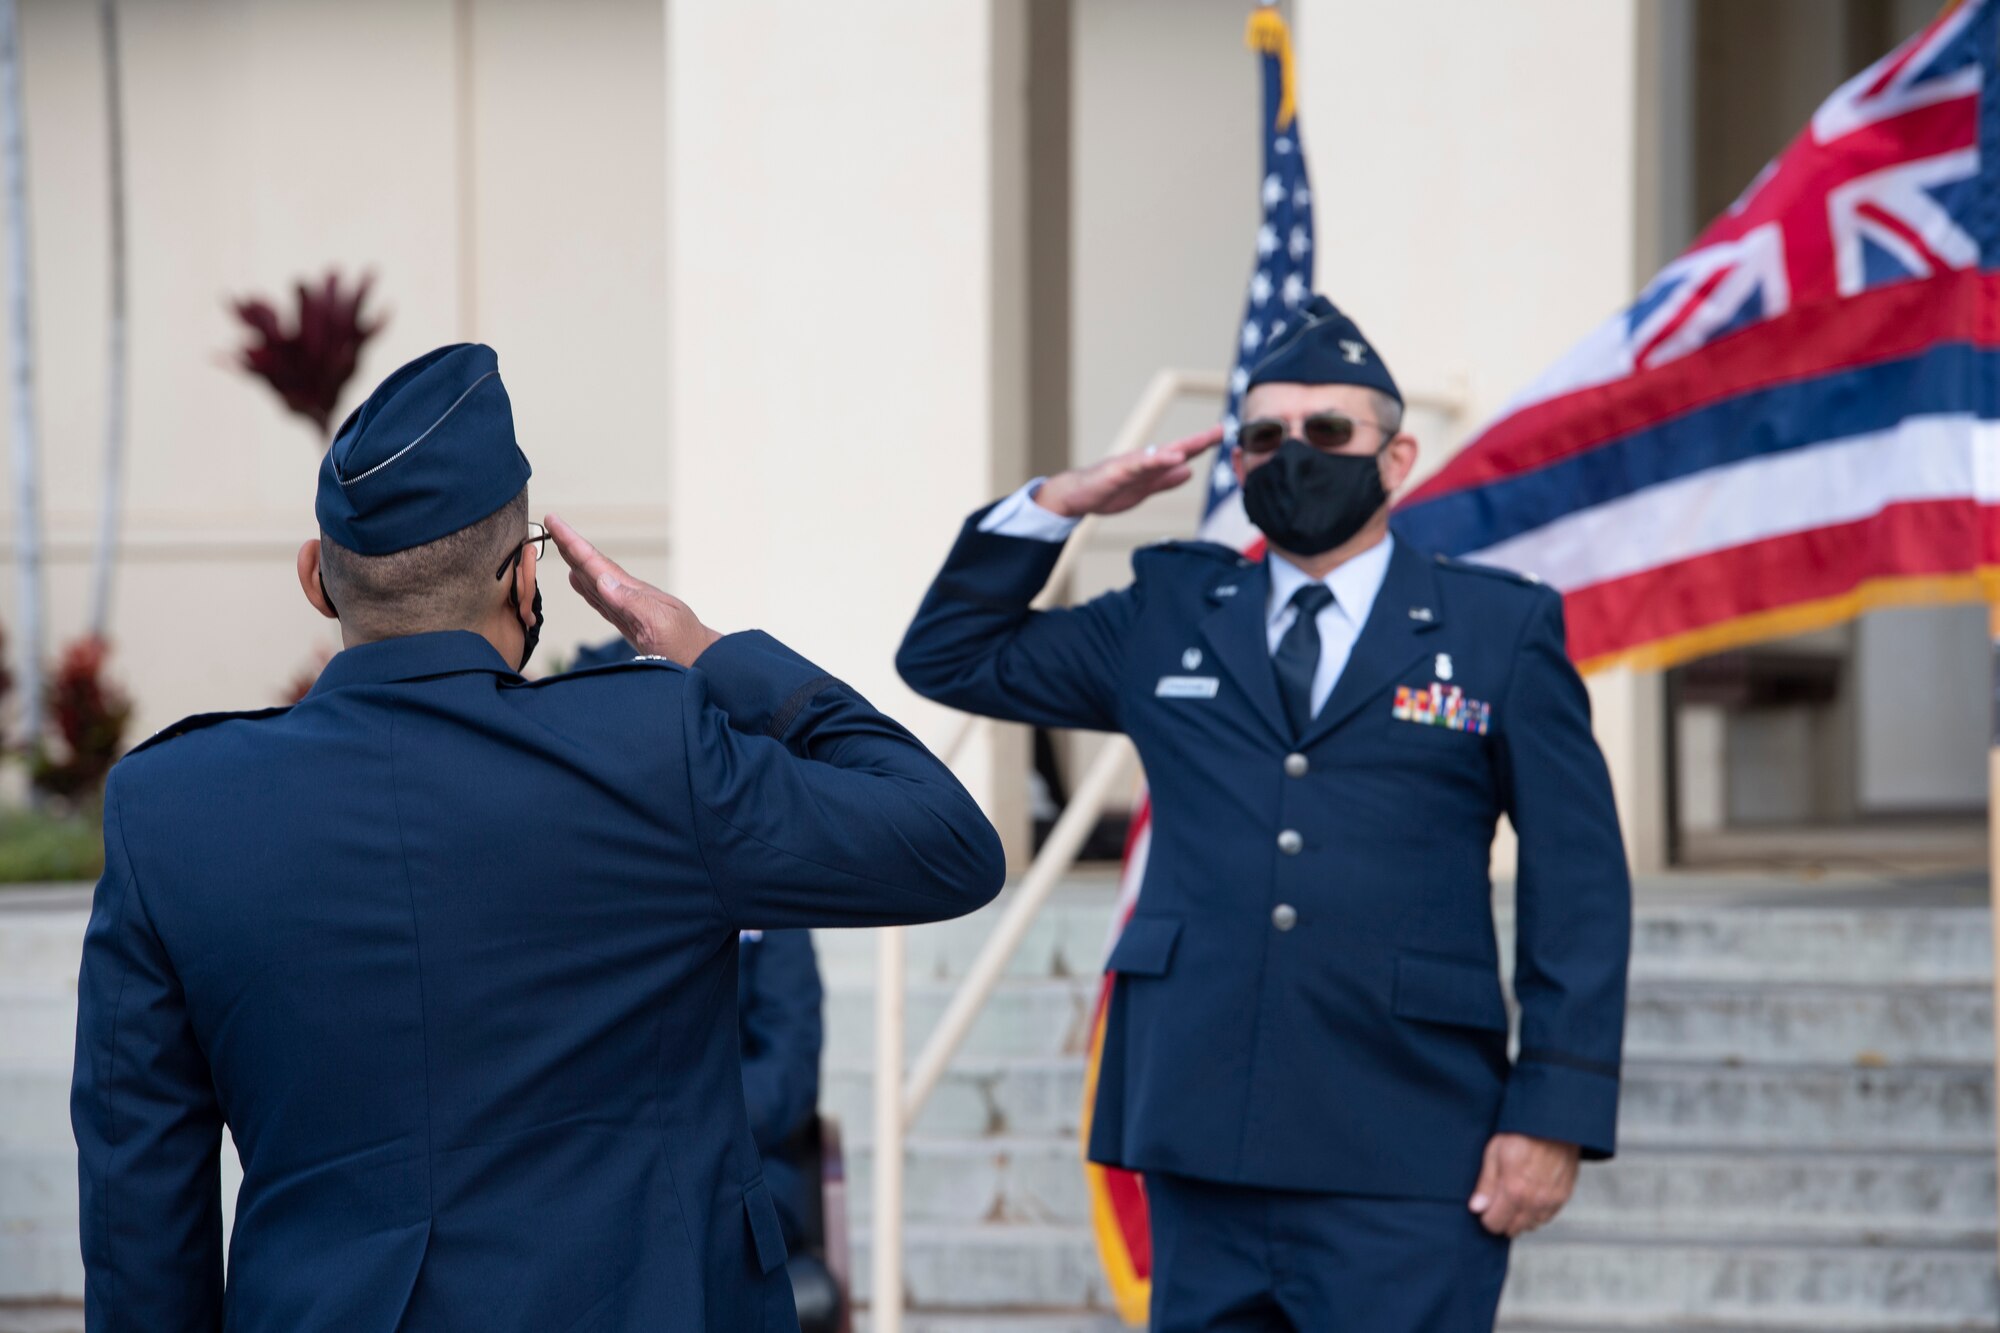 A photo of U.S. Air Force Col. Lee Bradshaw receiving one last salute as the 624th Aeromedical Staging Squadron commander from Lt. Col. Regan Ramos, 624th ASTS chief of nursing services, during the 624th ASTS change of command ceremony in front of the 15th Medical Group building at Joint Base Pearl Harbor-Hickam, Hawaii, Aug. 8, 2020.